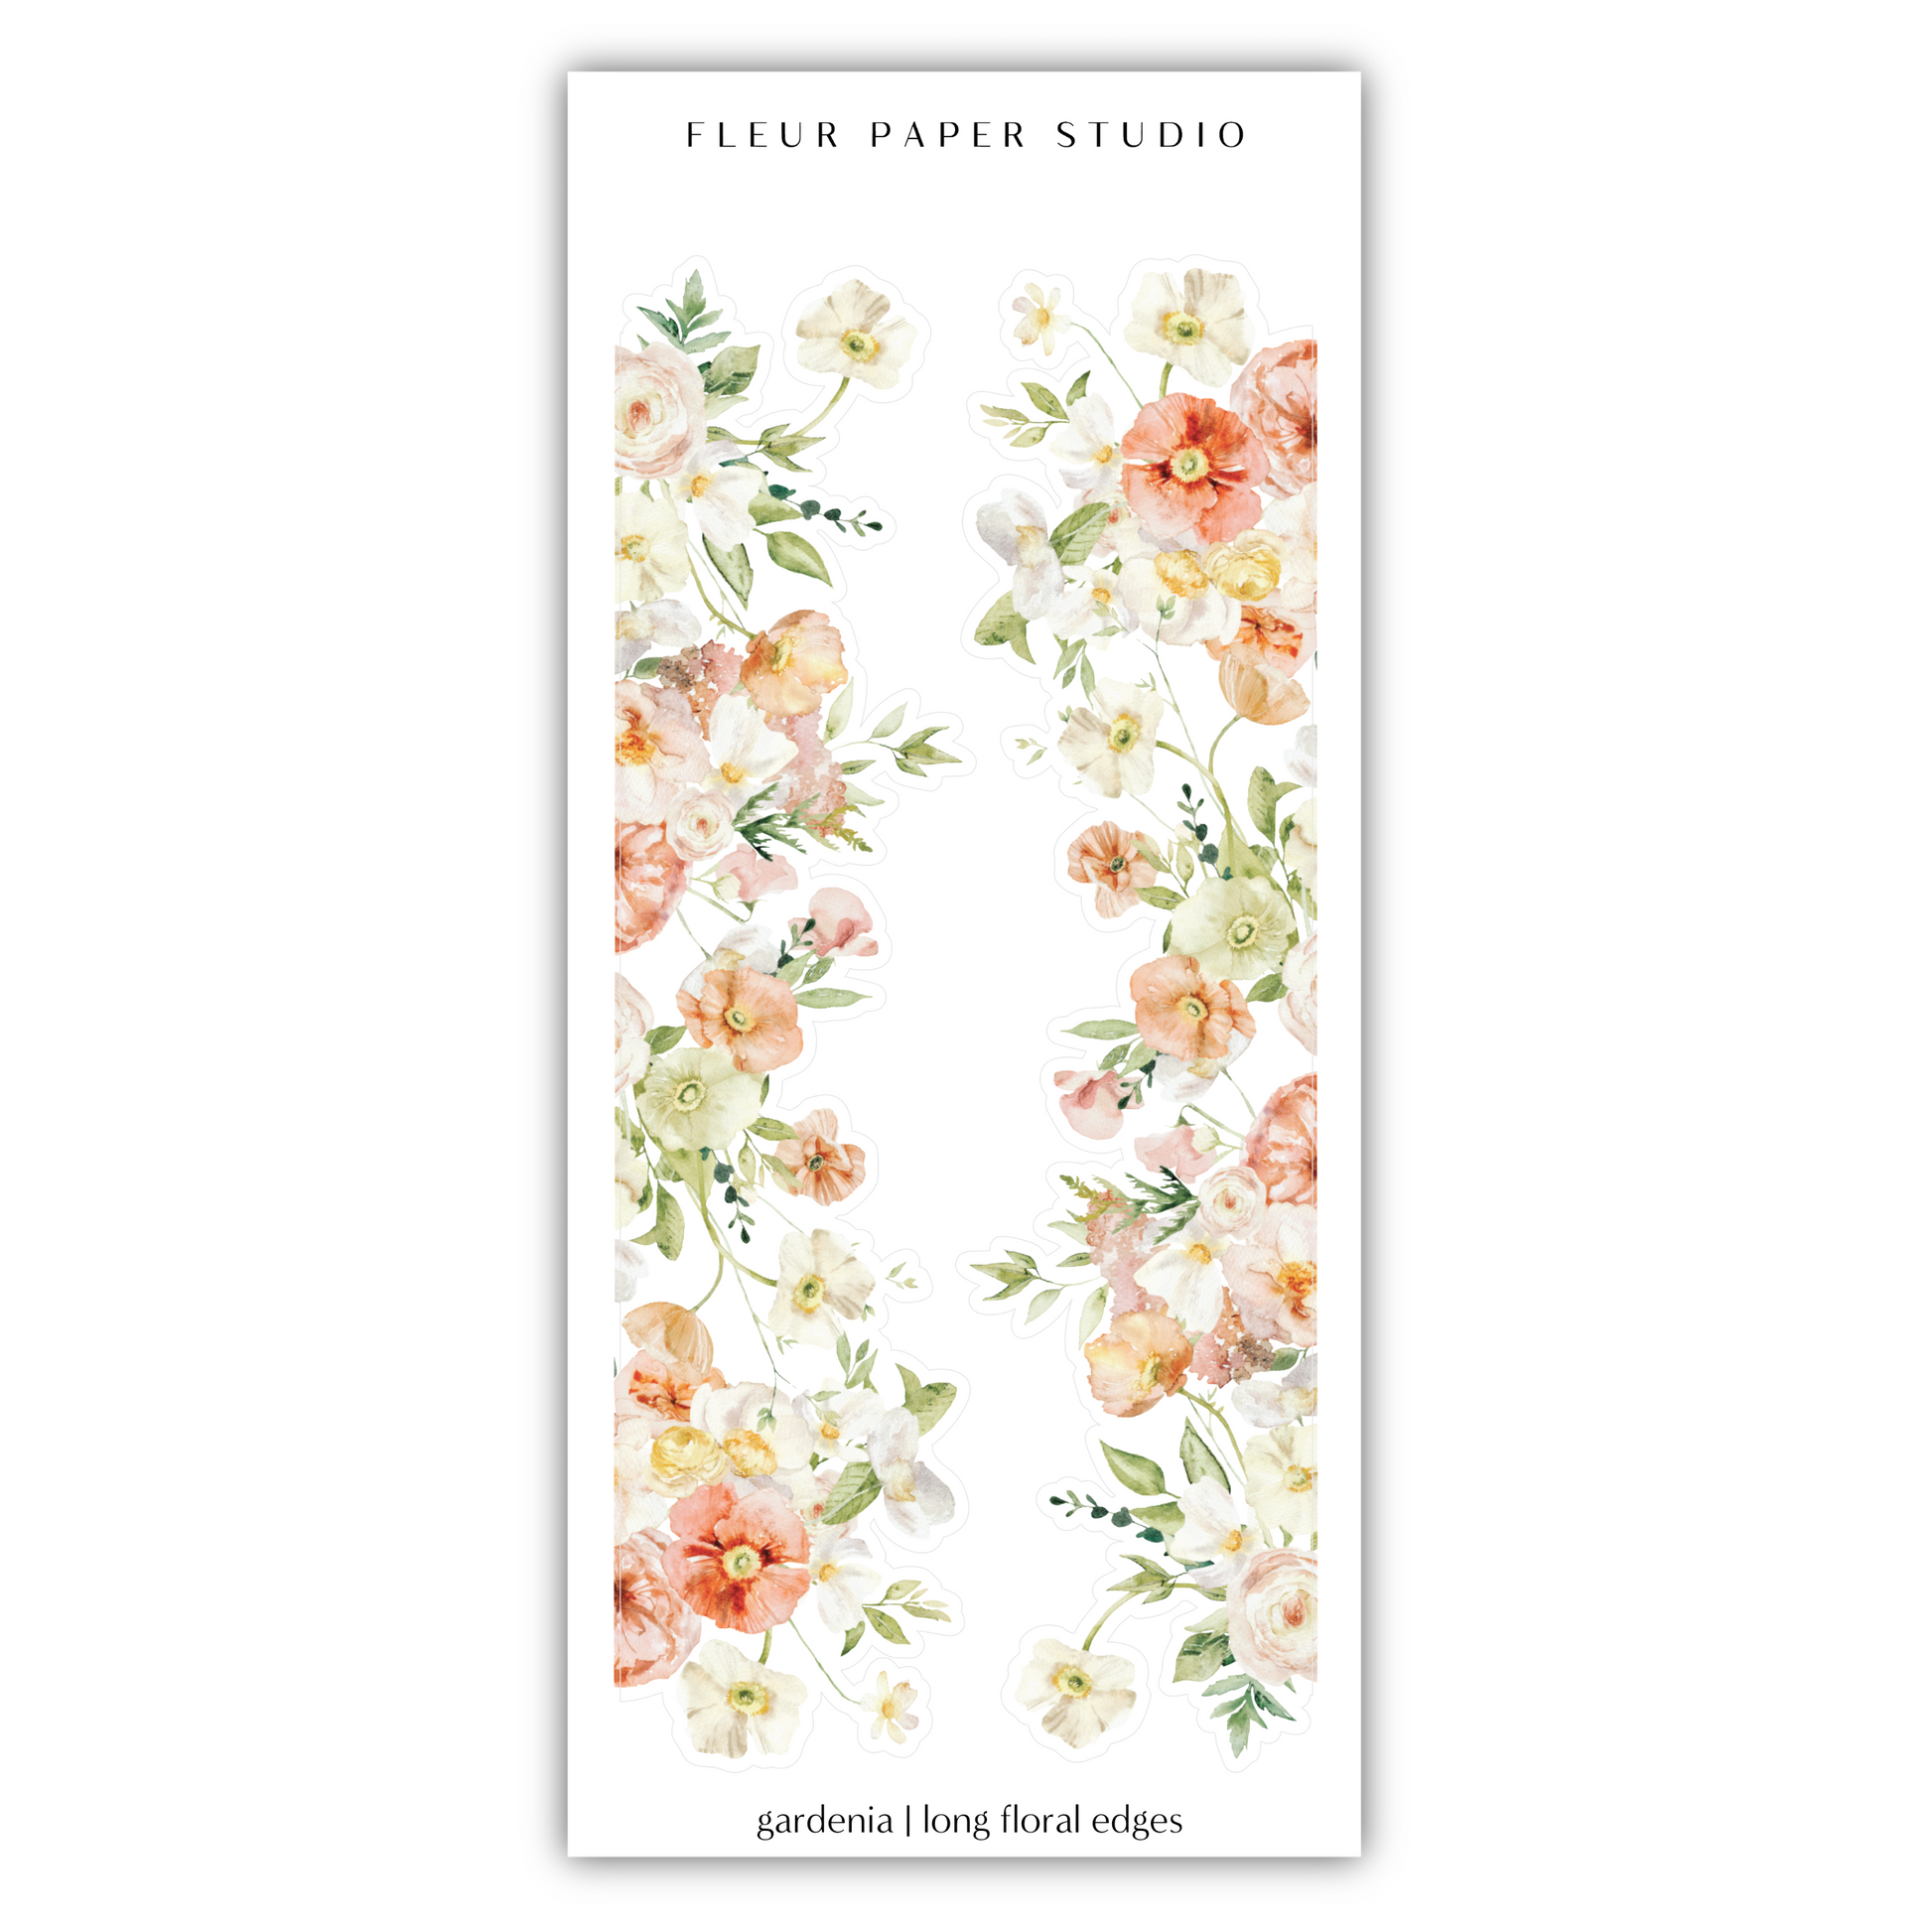 a flower sticker with watercolor flowers on it